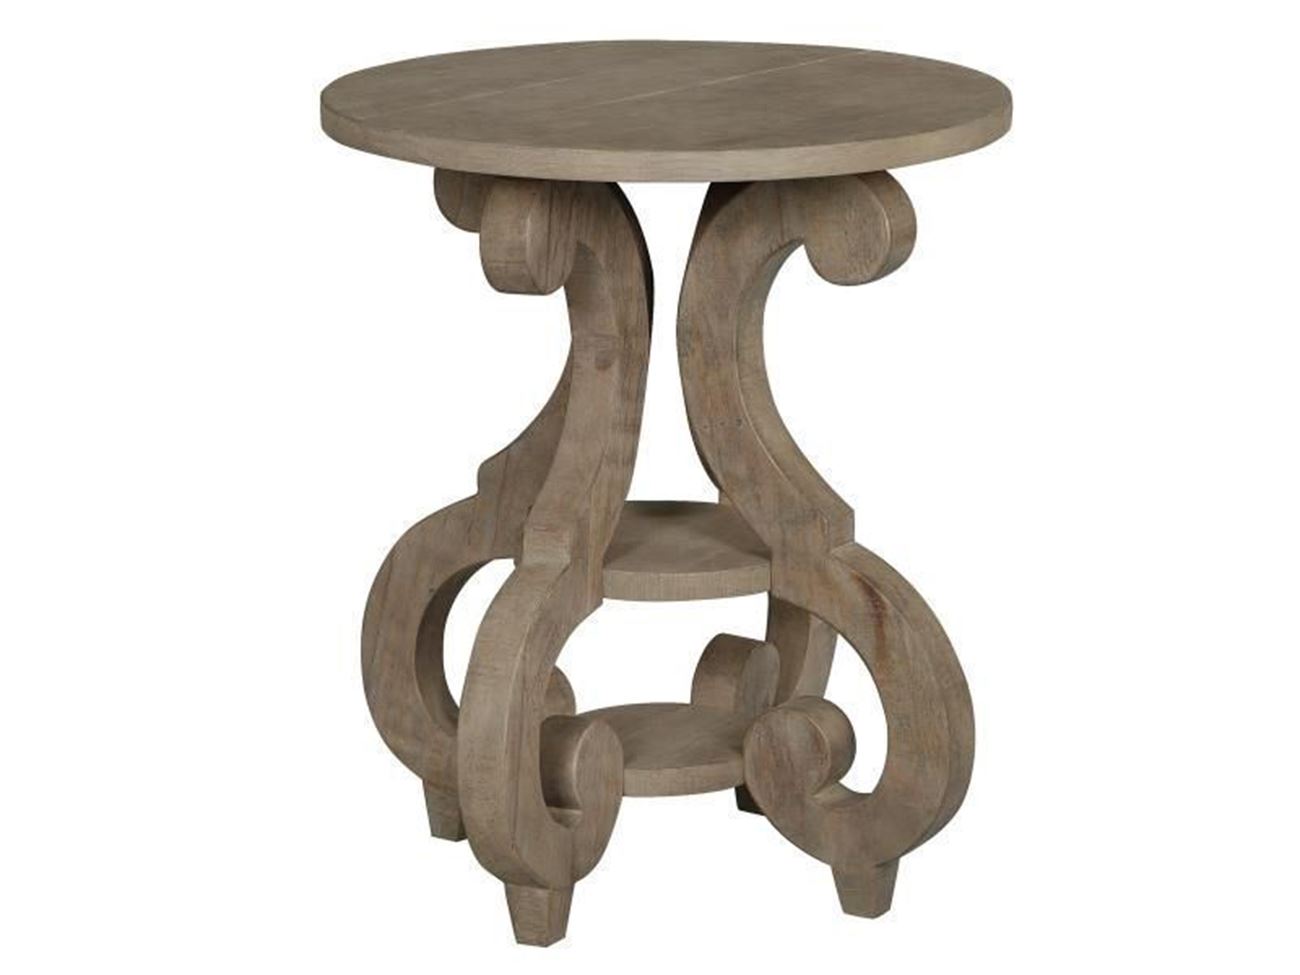 tinley park accent end table woodstock furniture mattress unique tables antique mirror natural wood coffee pier one bedroom sets modern black lamp oriental porcelain tall side